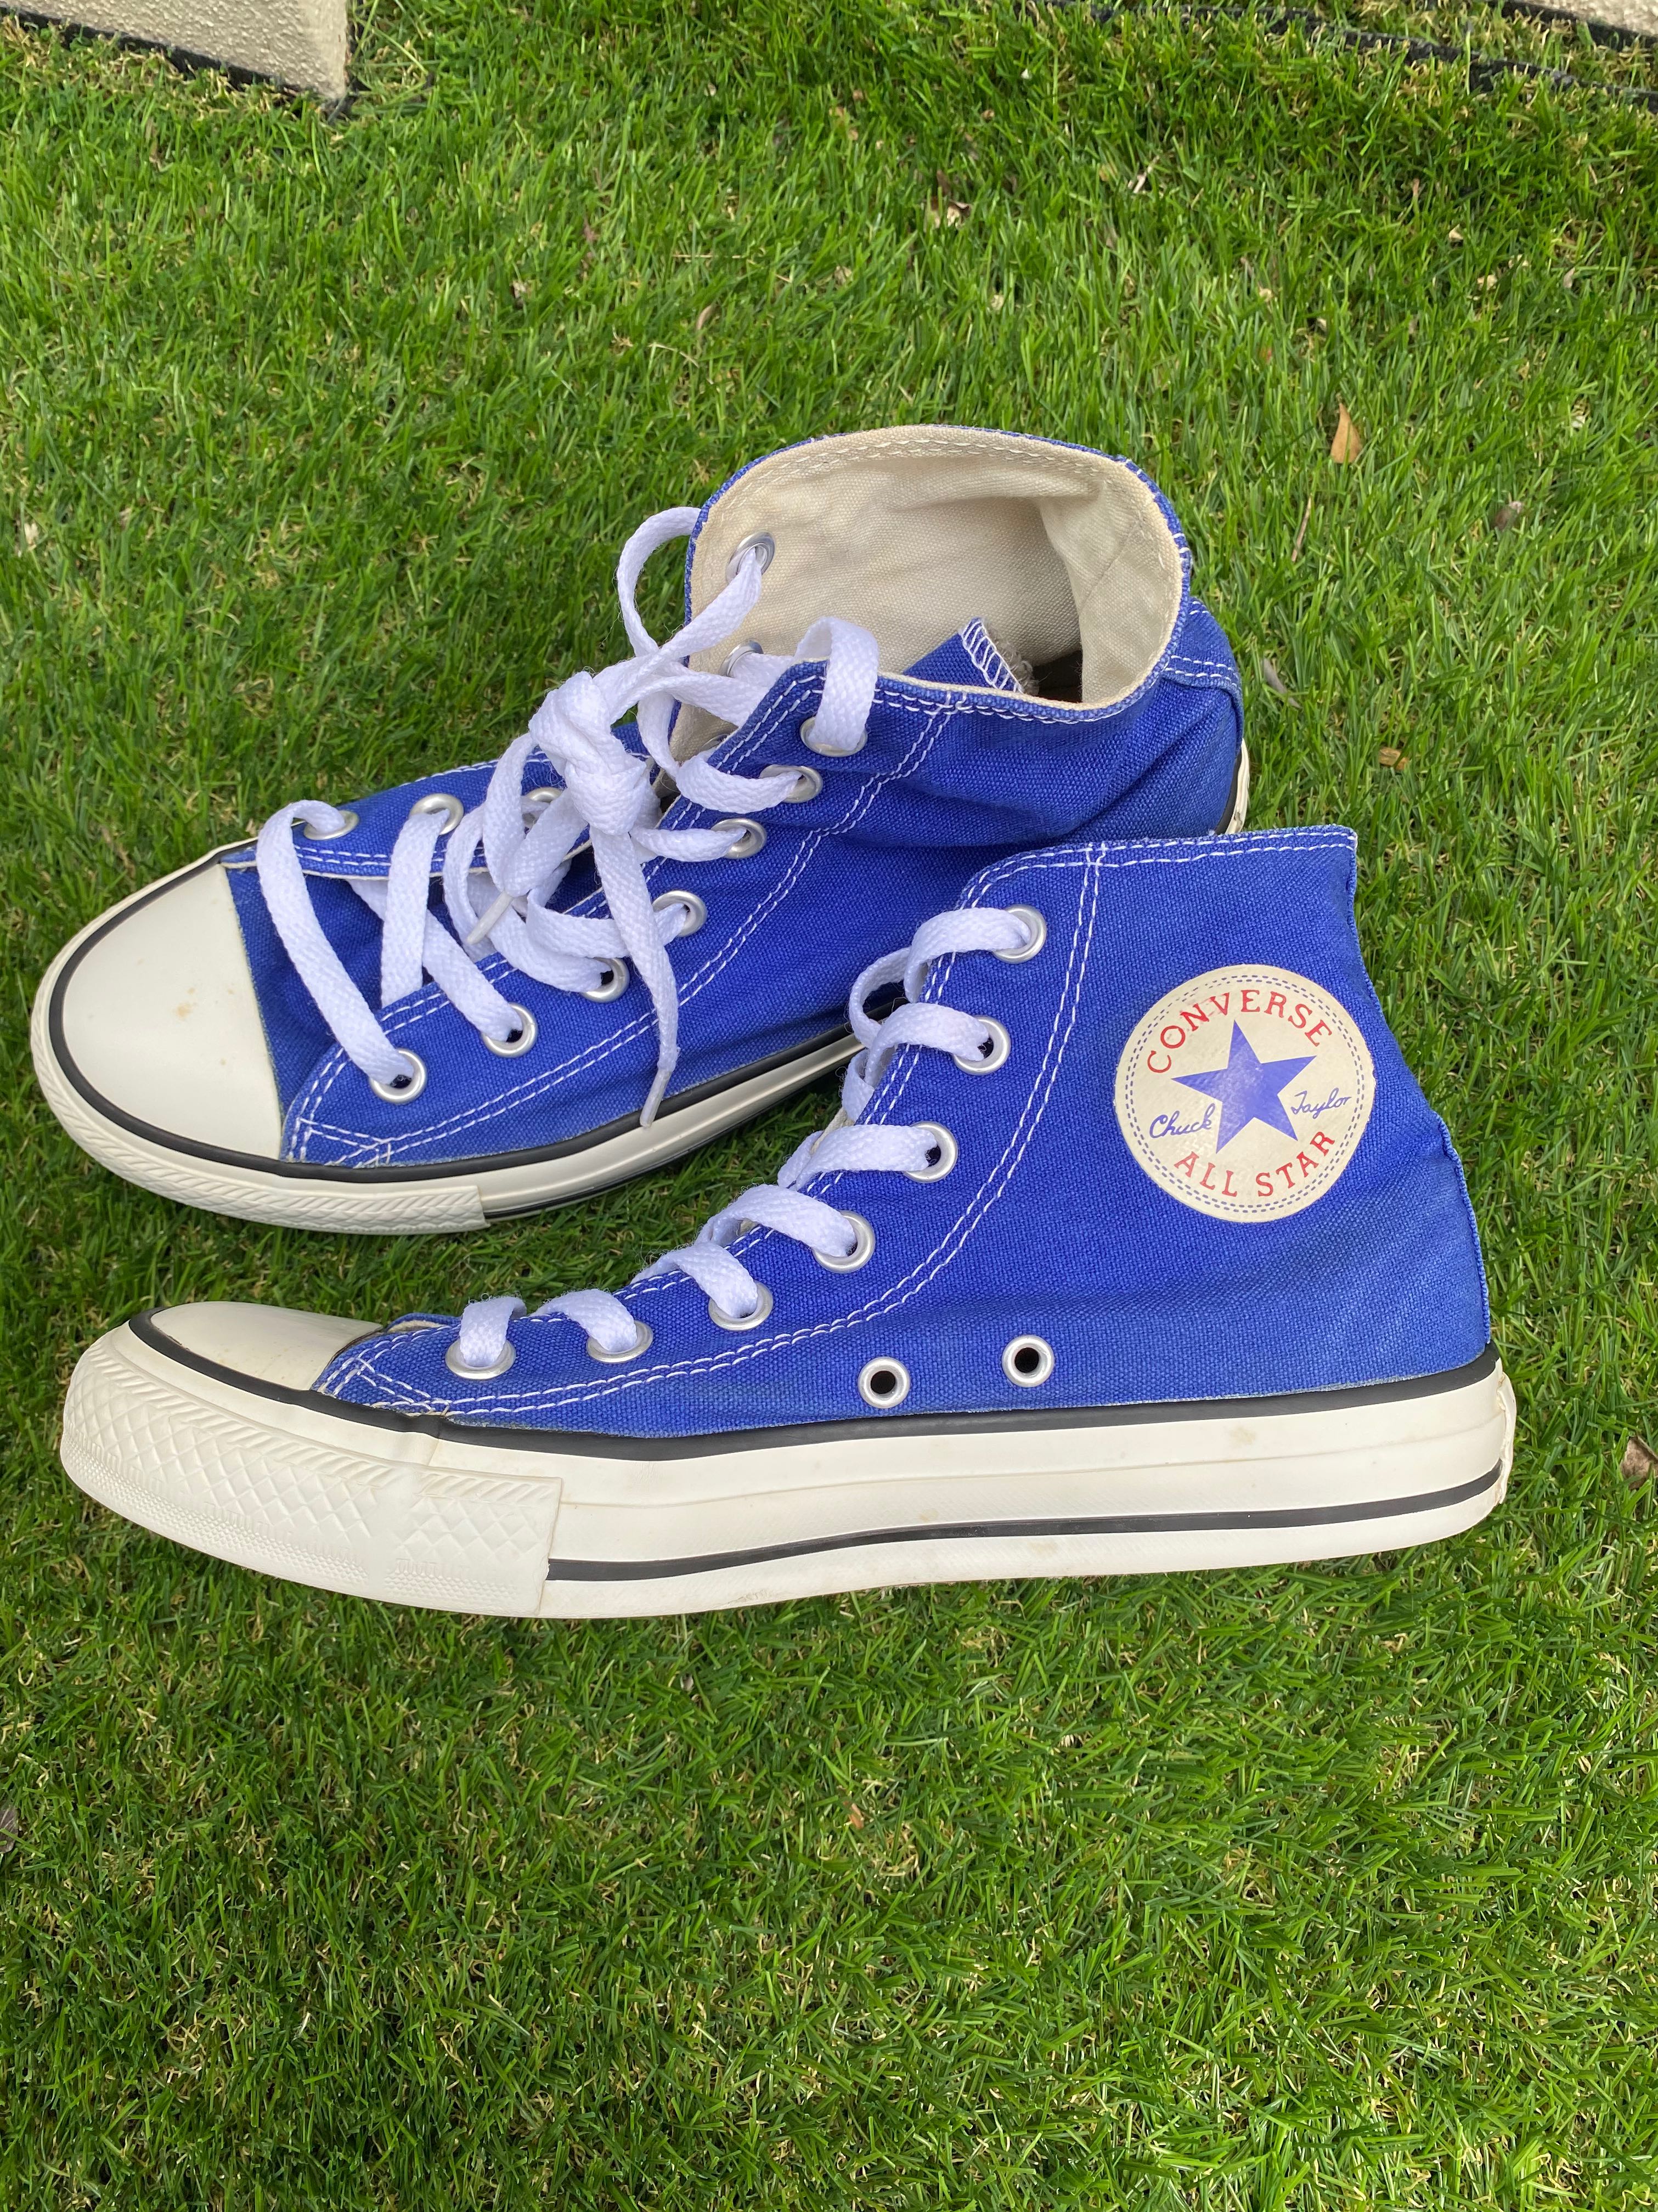 Used] Original Converse High Blue Sneakers, Women's Fashion,